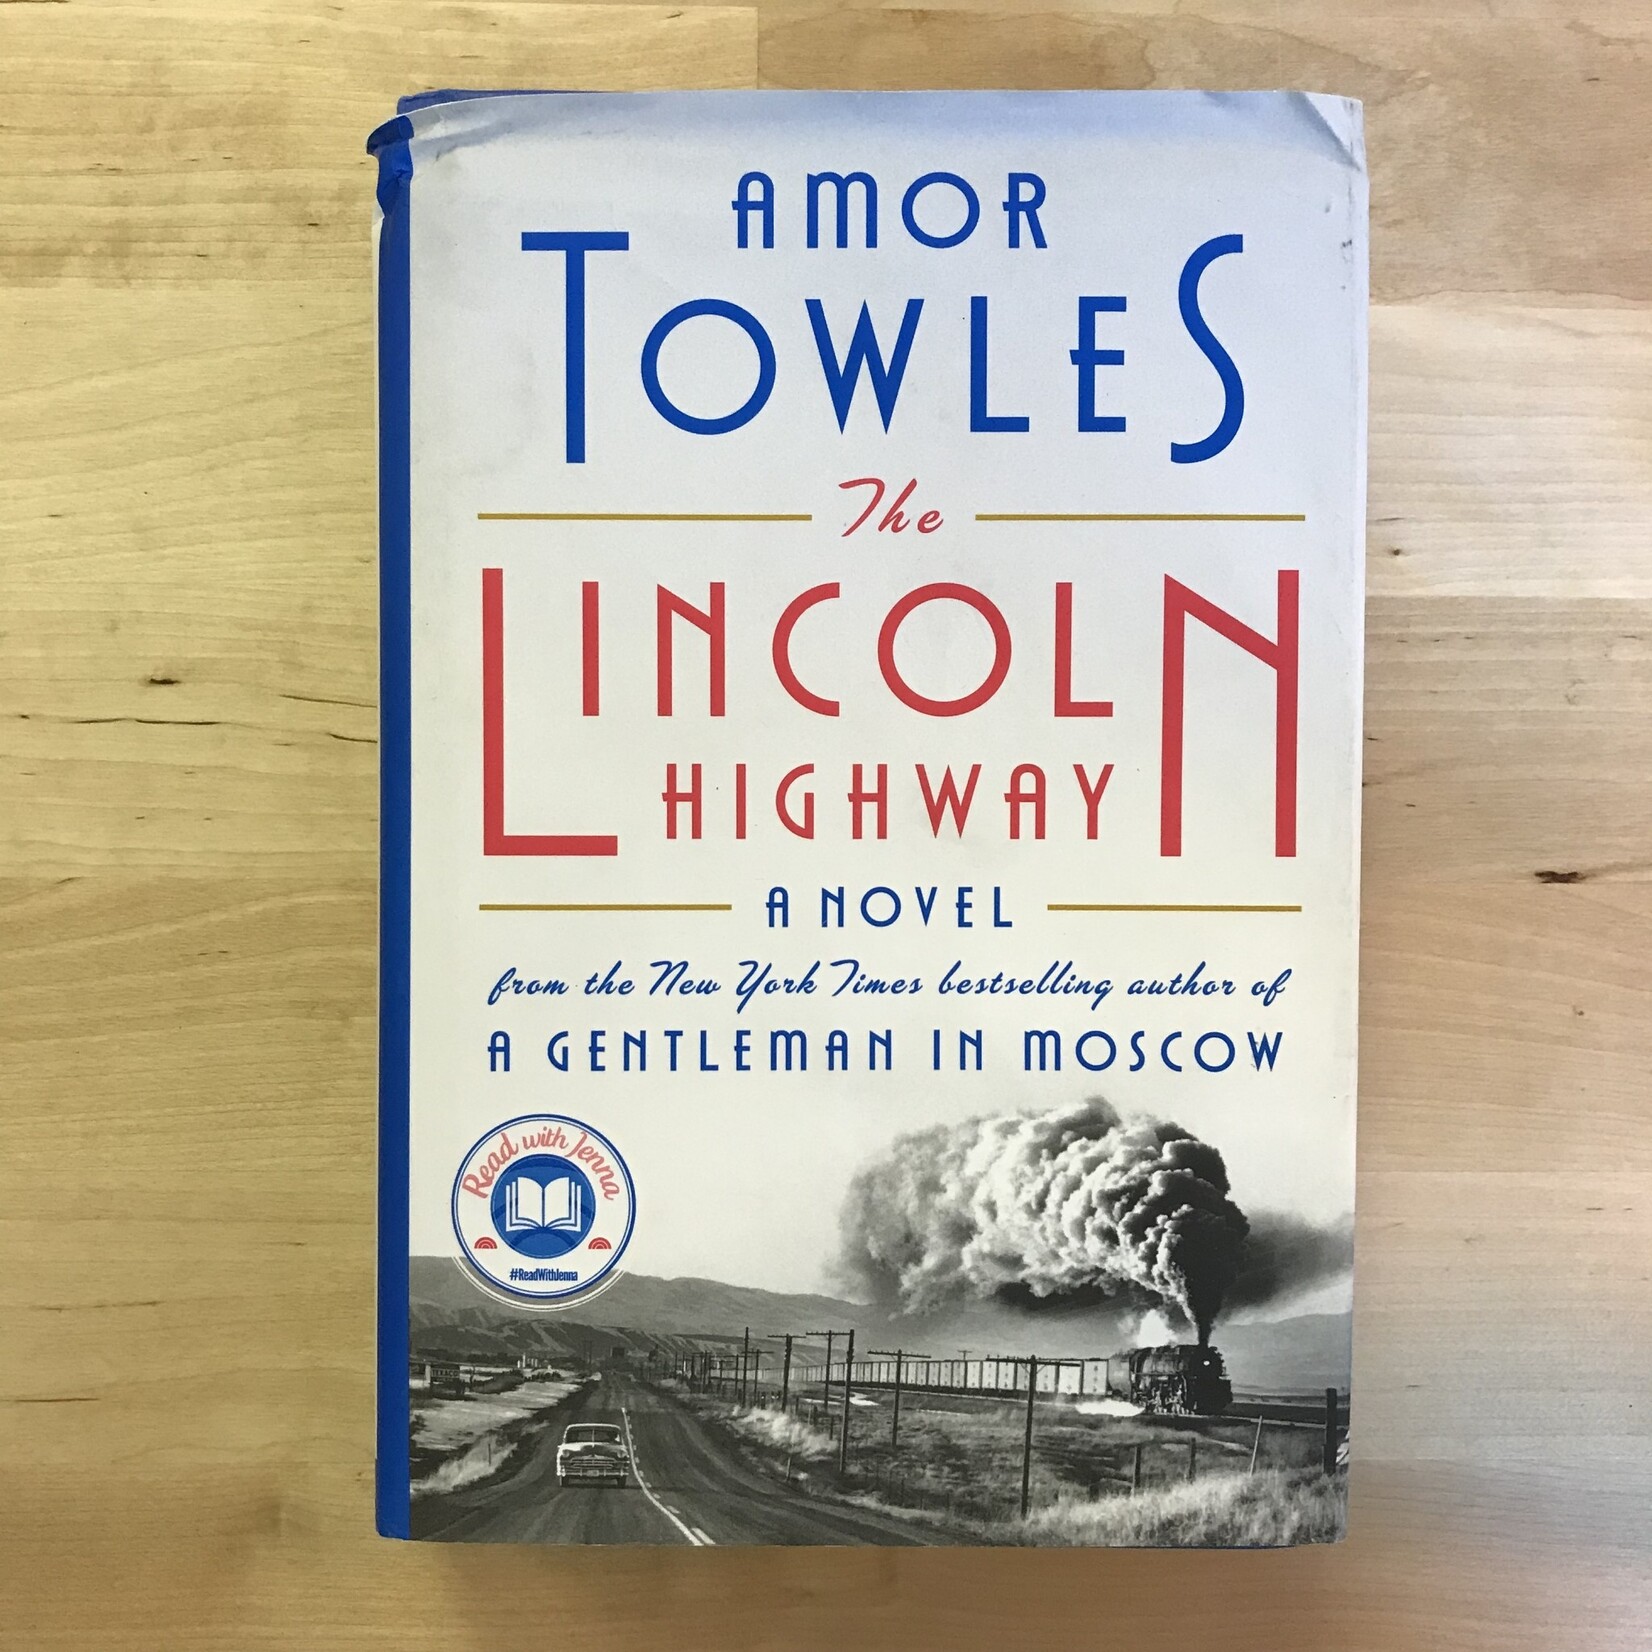 Amor Towles - The Lincoln Highway - Hardback (USED)